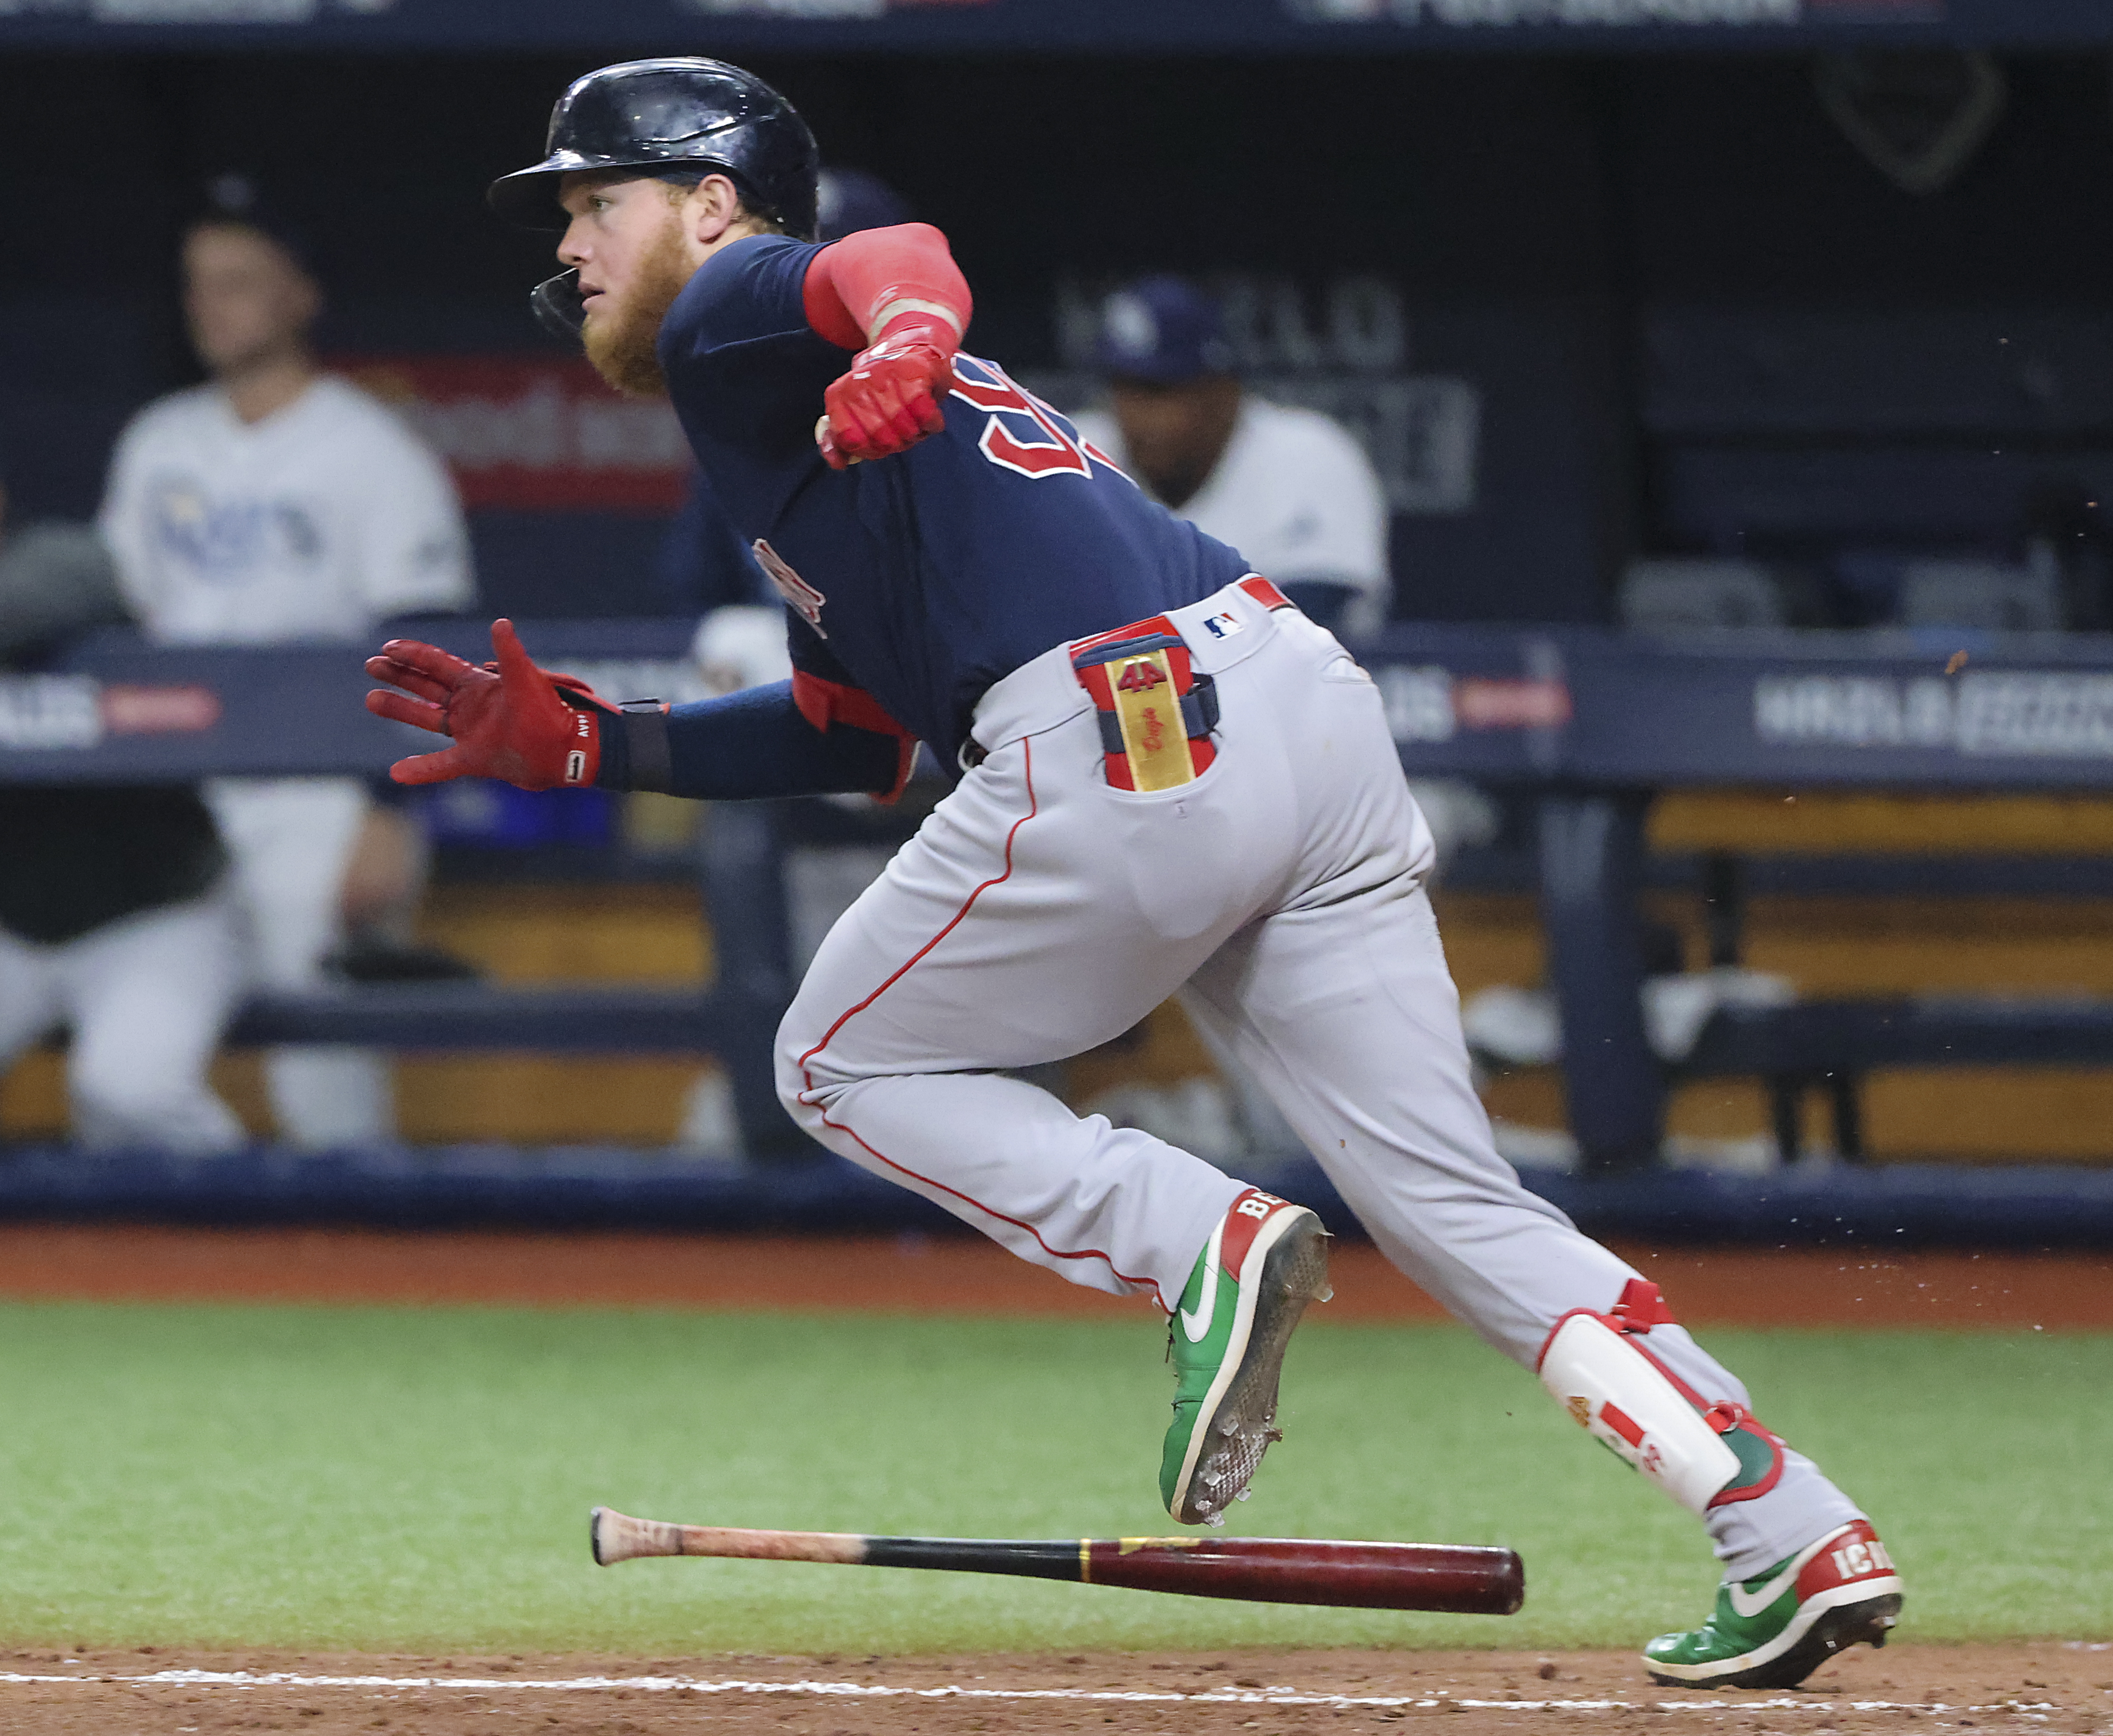 Alex Verdugo injury: Boston Red Sox outfielder '100%' after he had